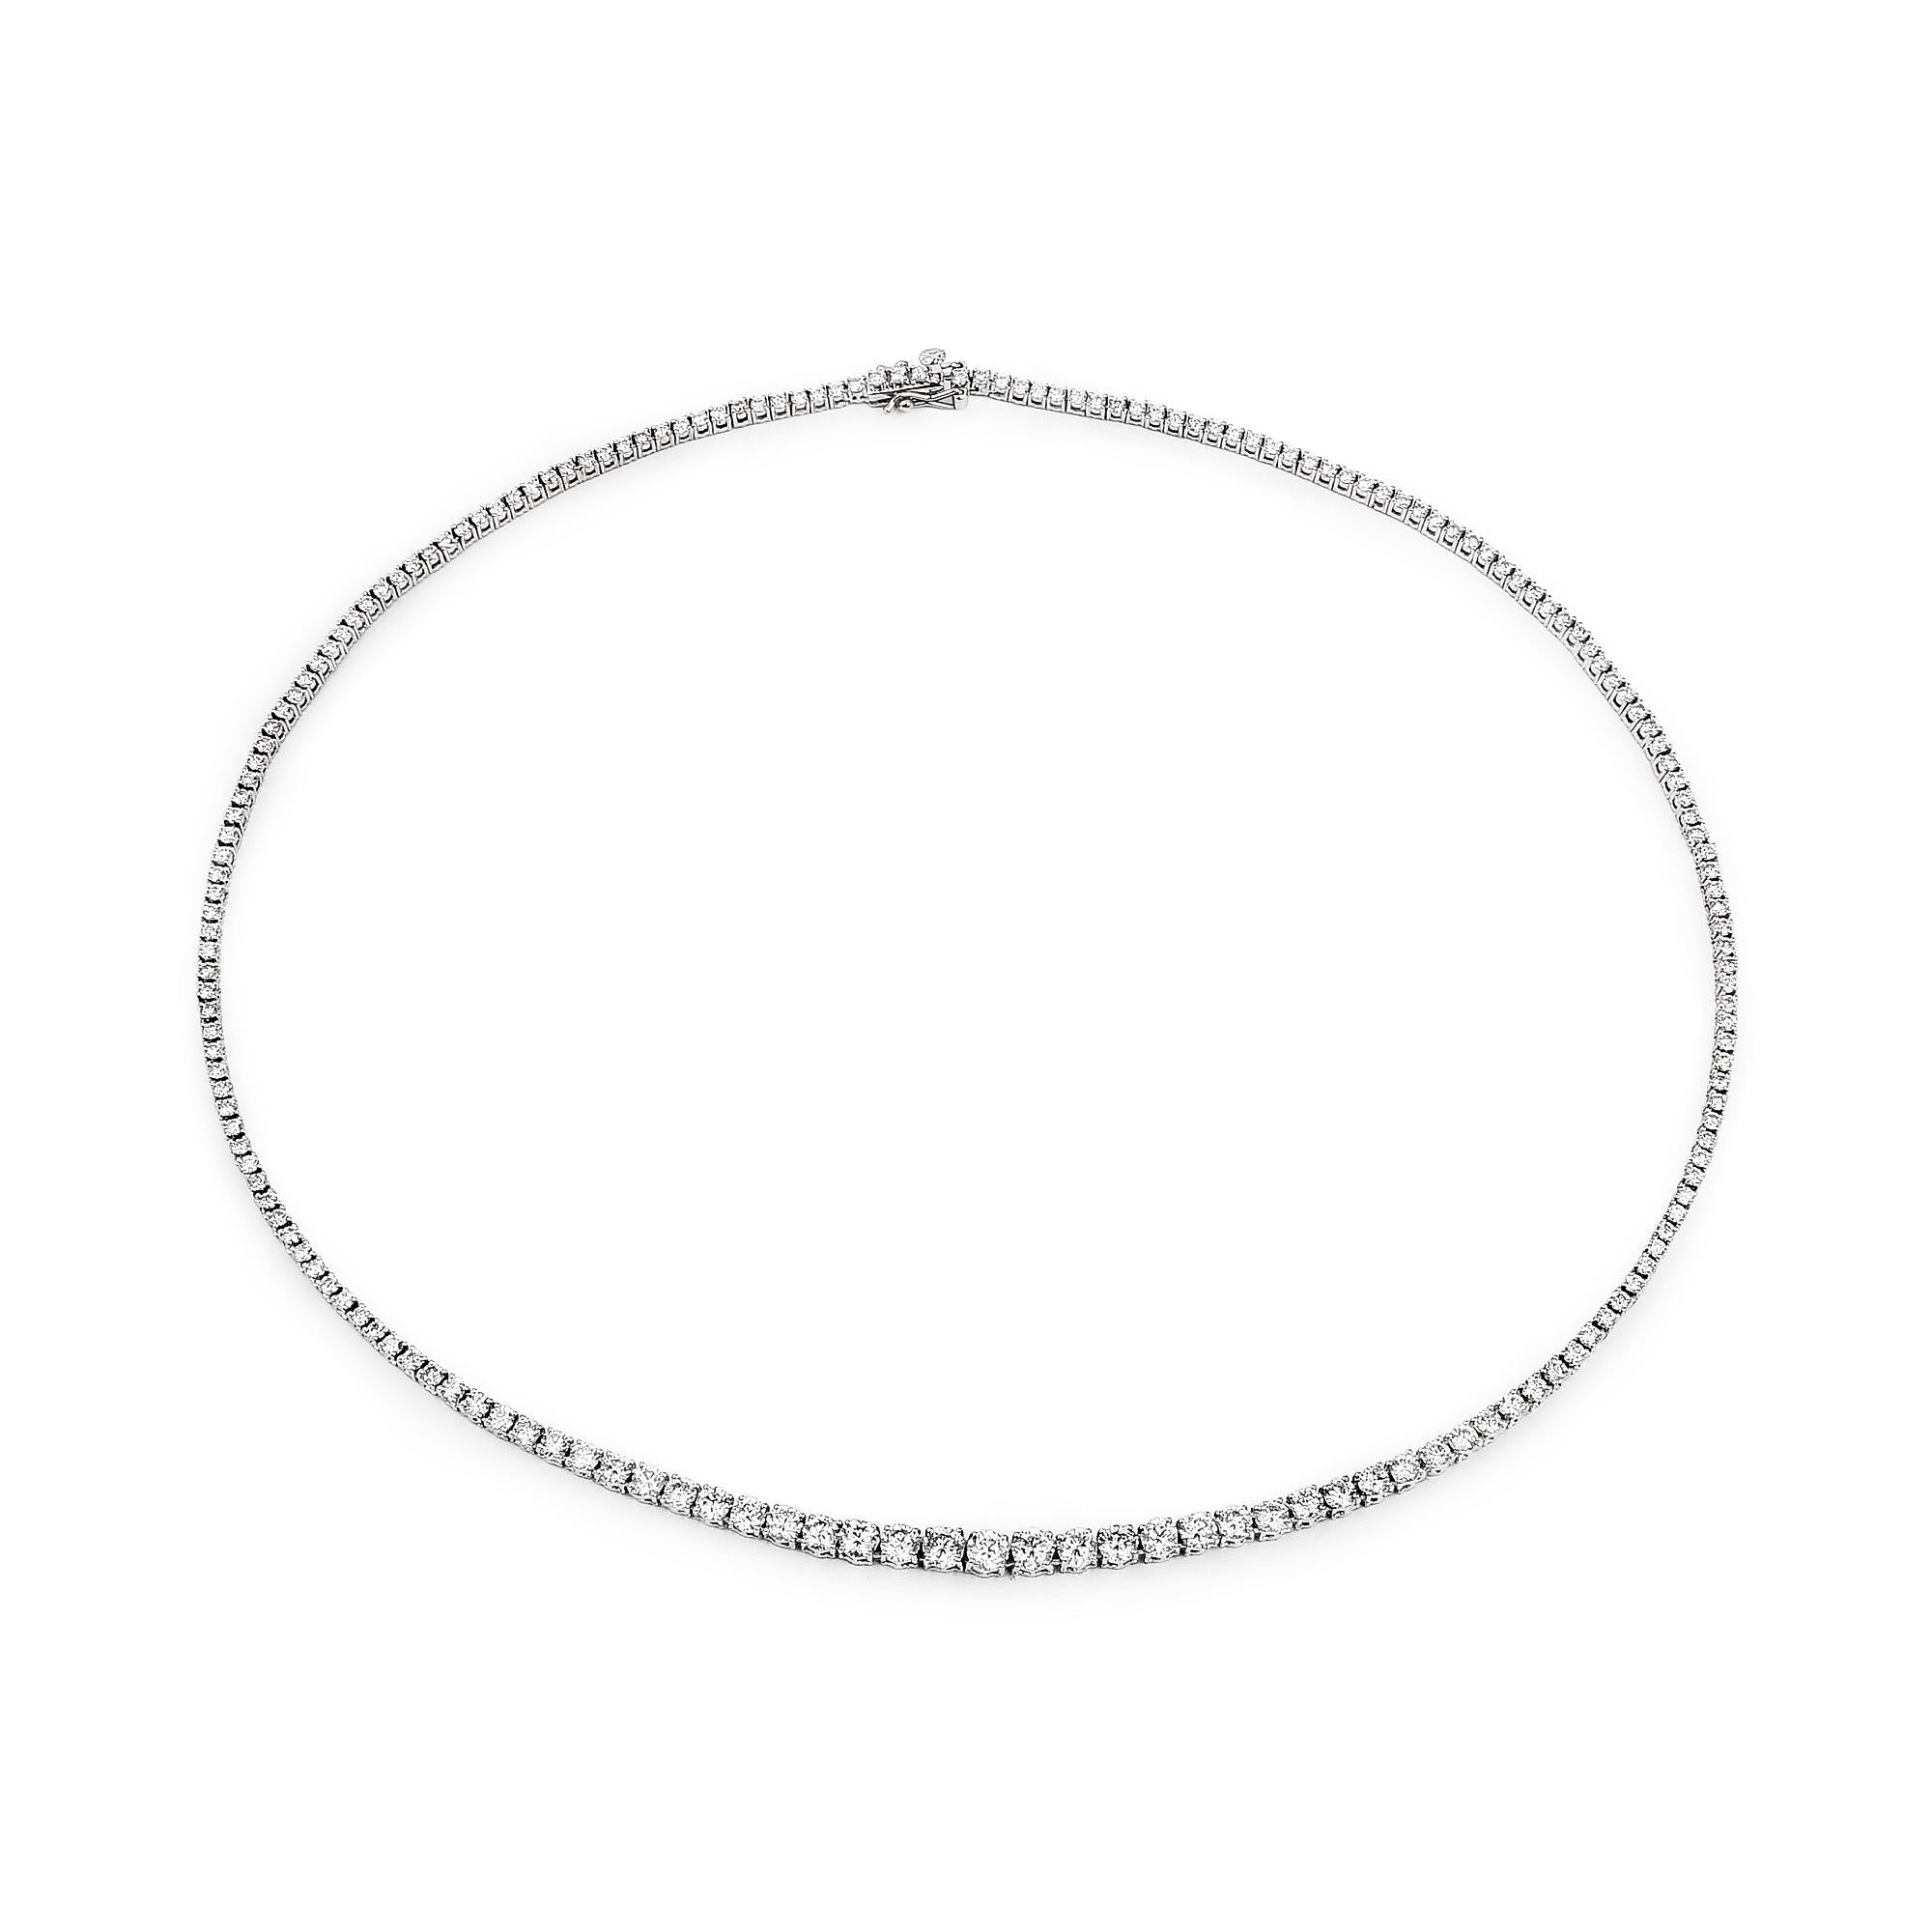 Flaunt yourself with these white diamond gold necklace. The natural diamonds have a combined weight of 8.42 carats and are set in 14K white gold. The white hue of these necklace adds a pop of color to any look! The understated design and vibrant